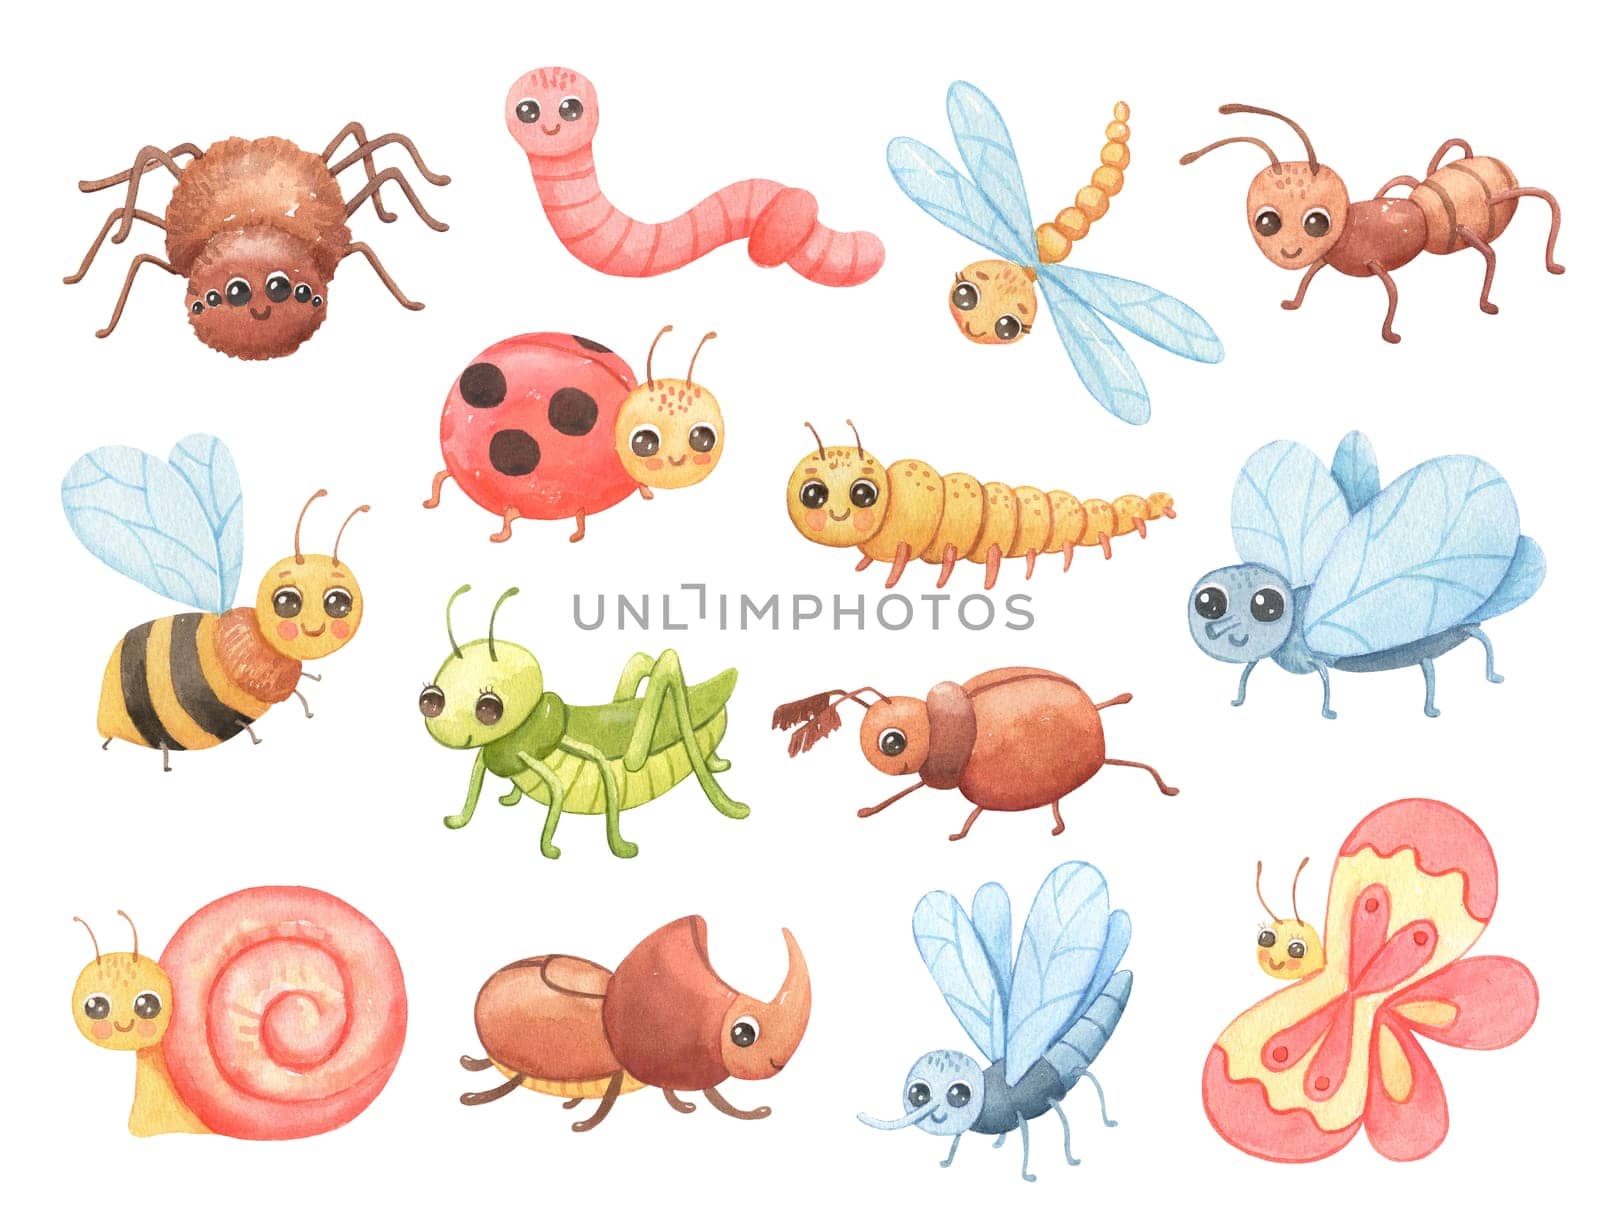 Cartoon insects set. Cute ant, grasshopper and snail. Childish watercolor illustration isolated on white background